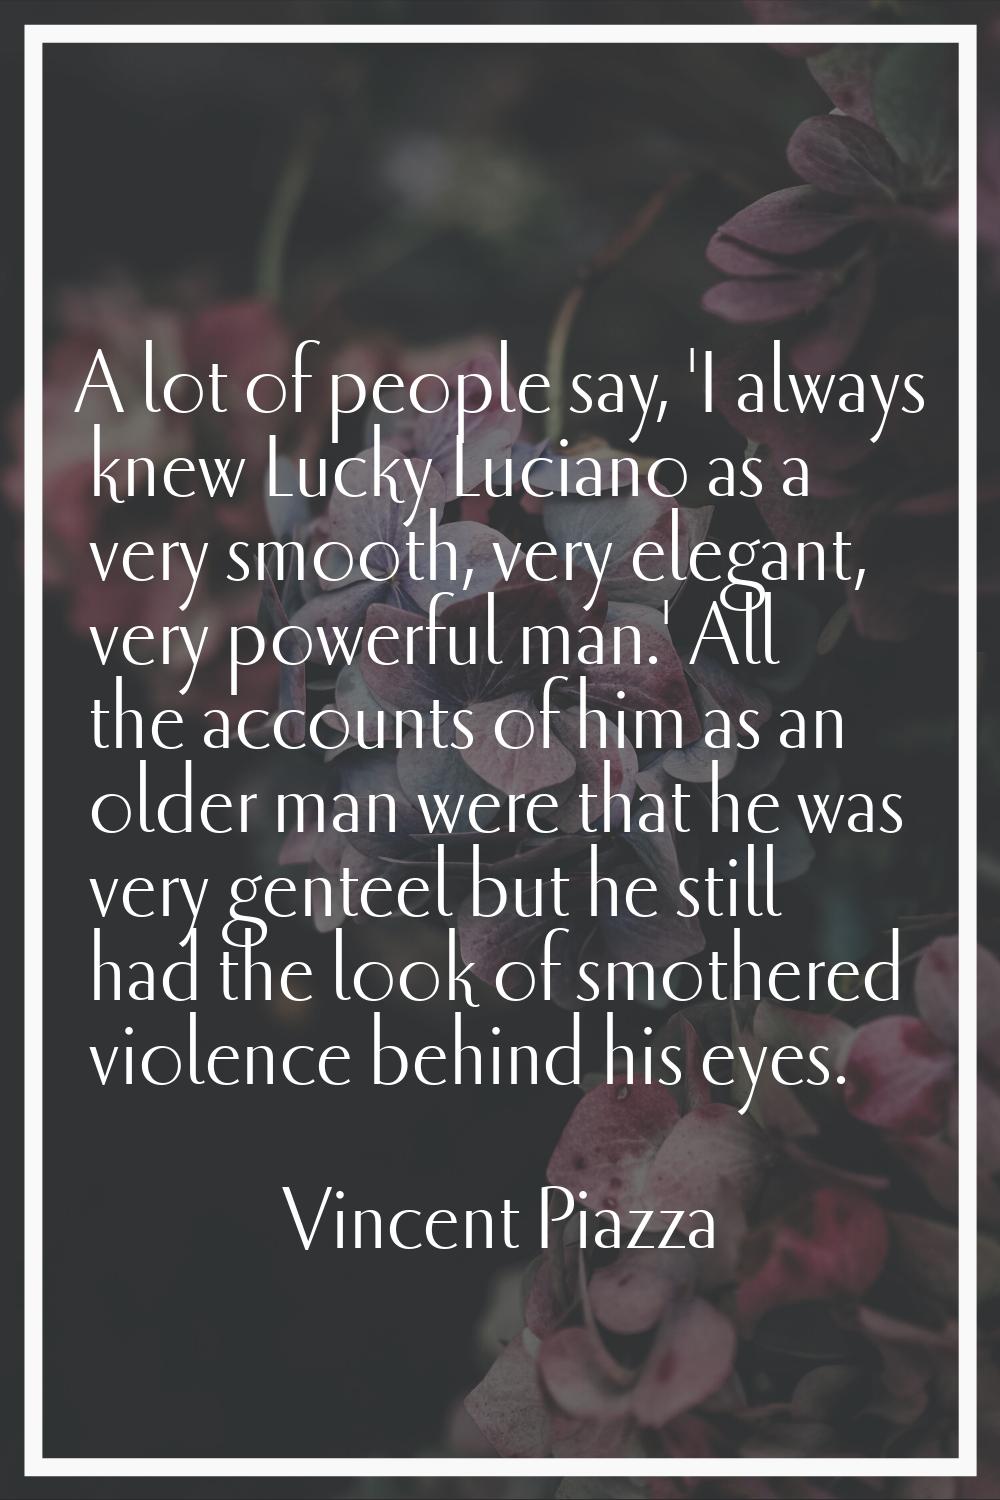 A lot of people say, 'I always knew Lucky Luciano as a very smooth, very elegant, very powerful man